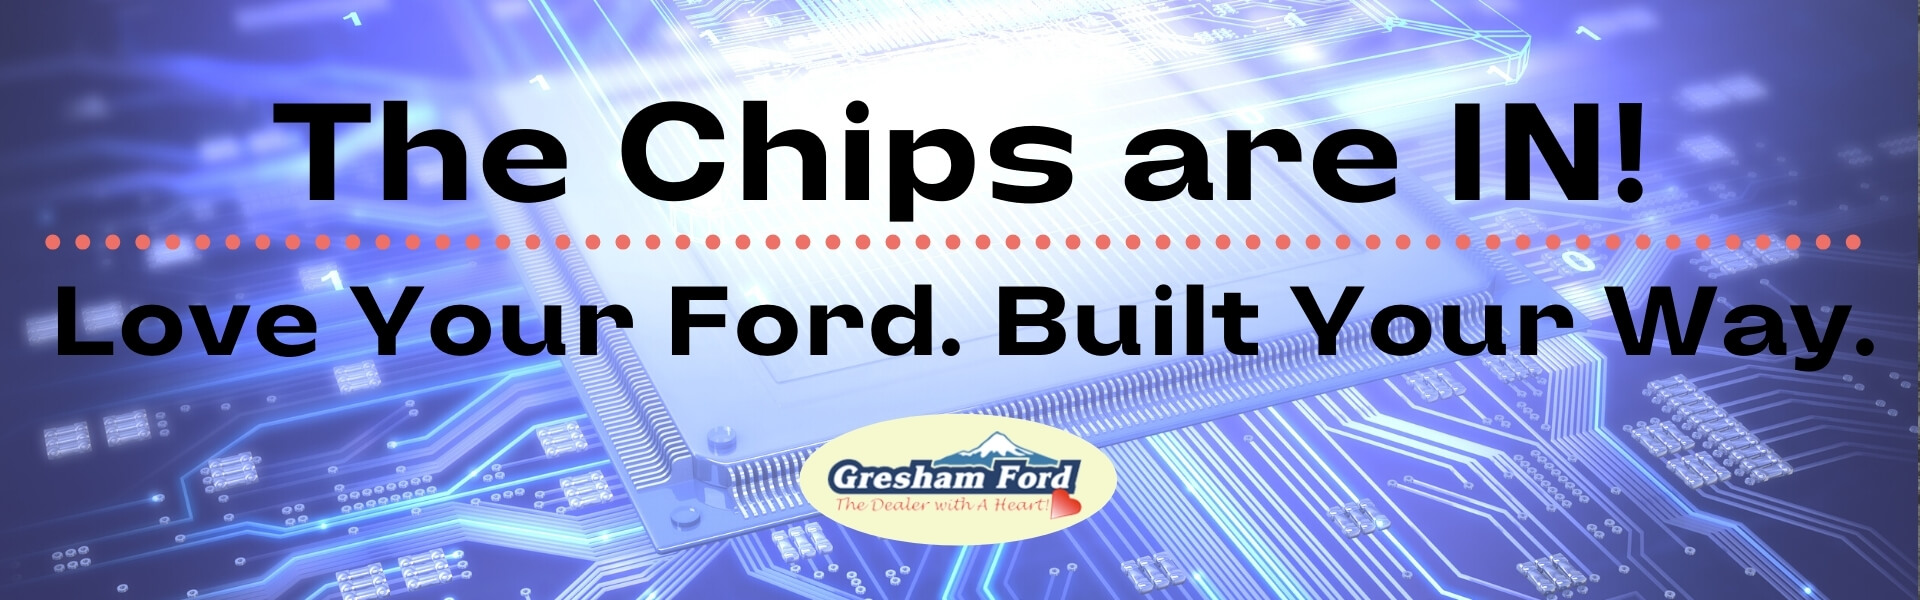 Ford Chip Shortage is Over